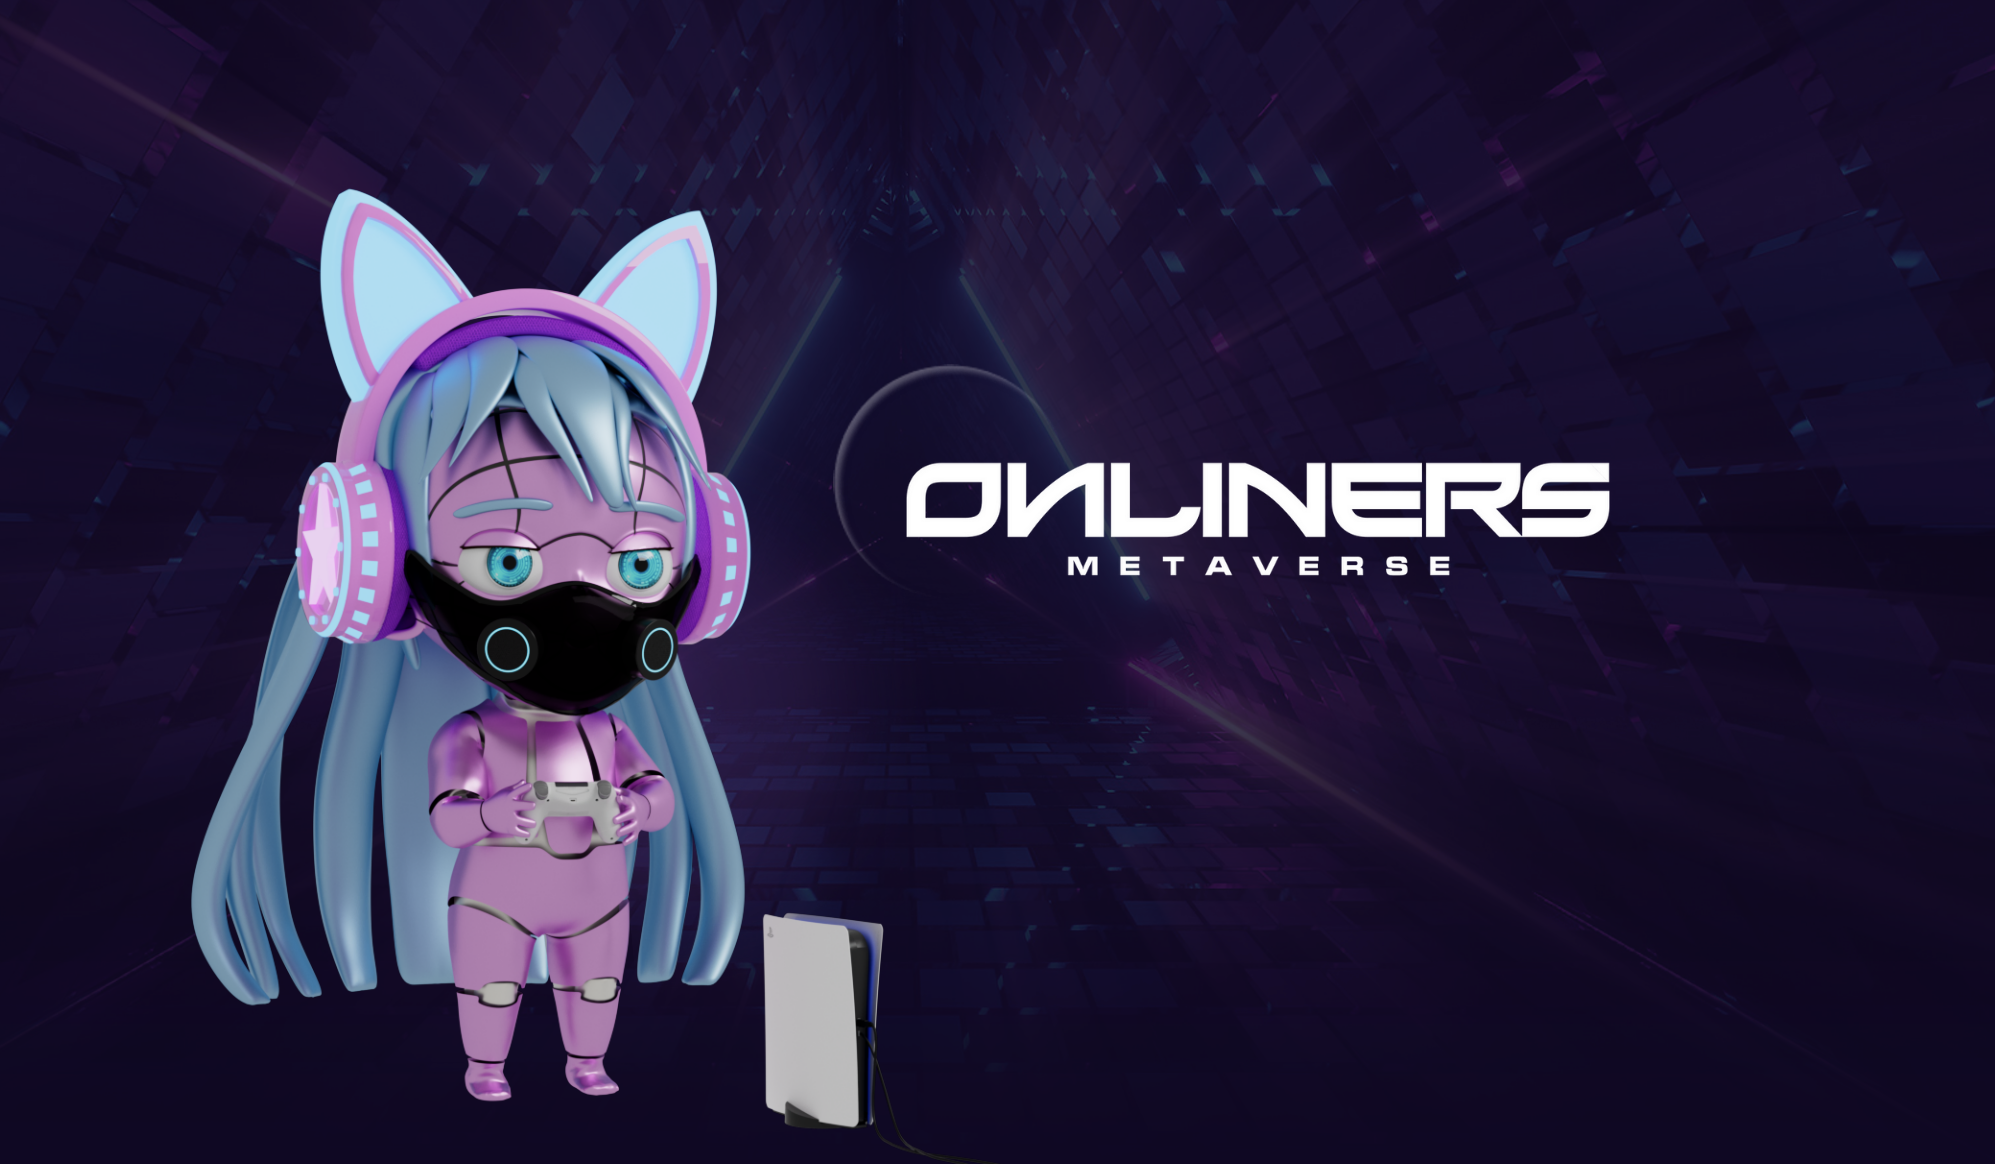 How Onliners Metaverse is Set To Build A Unified Powerful Online Community